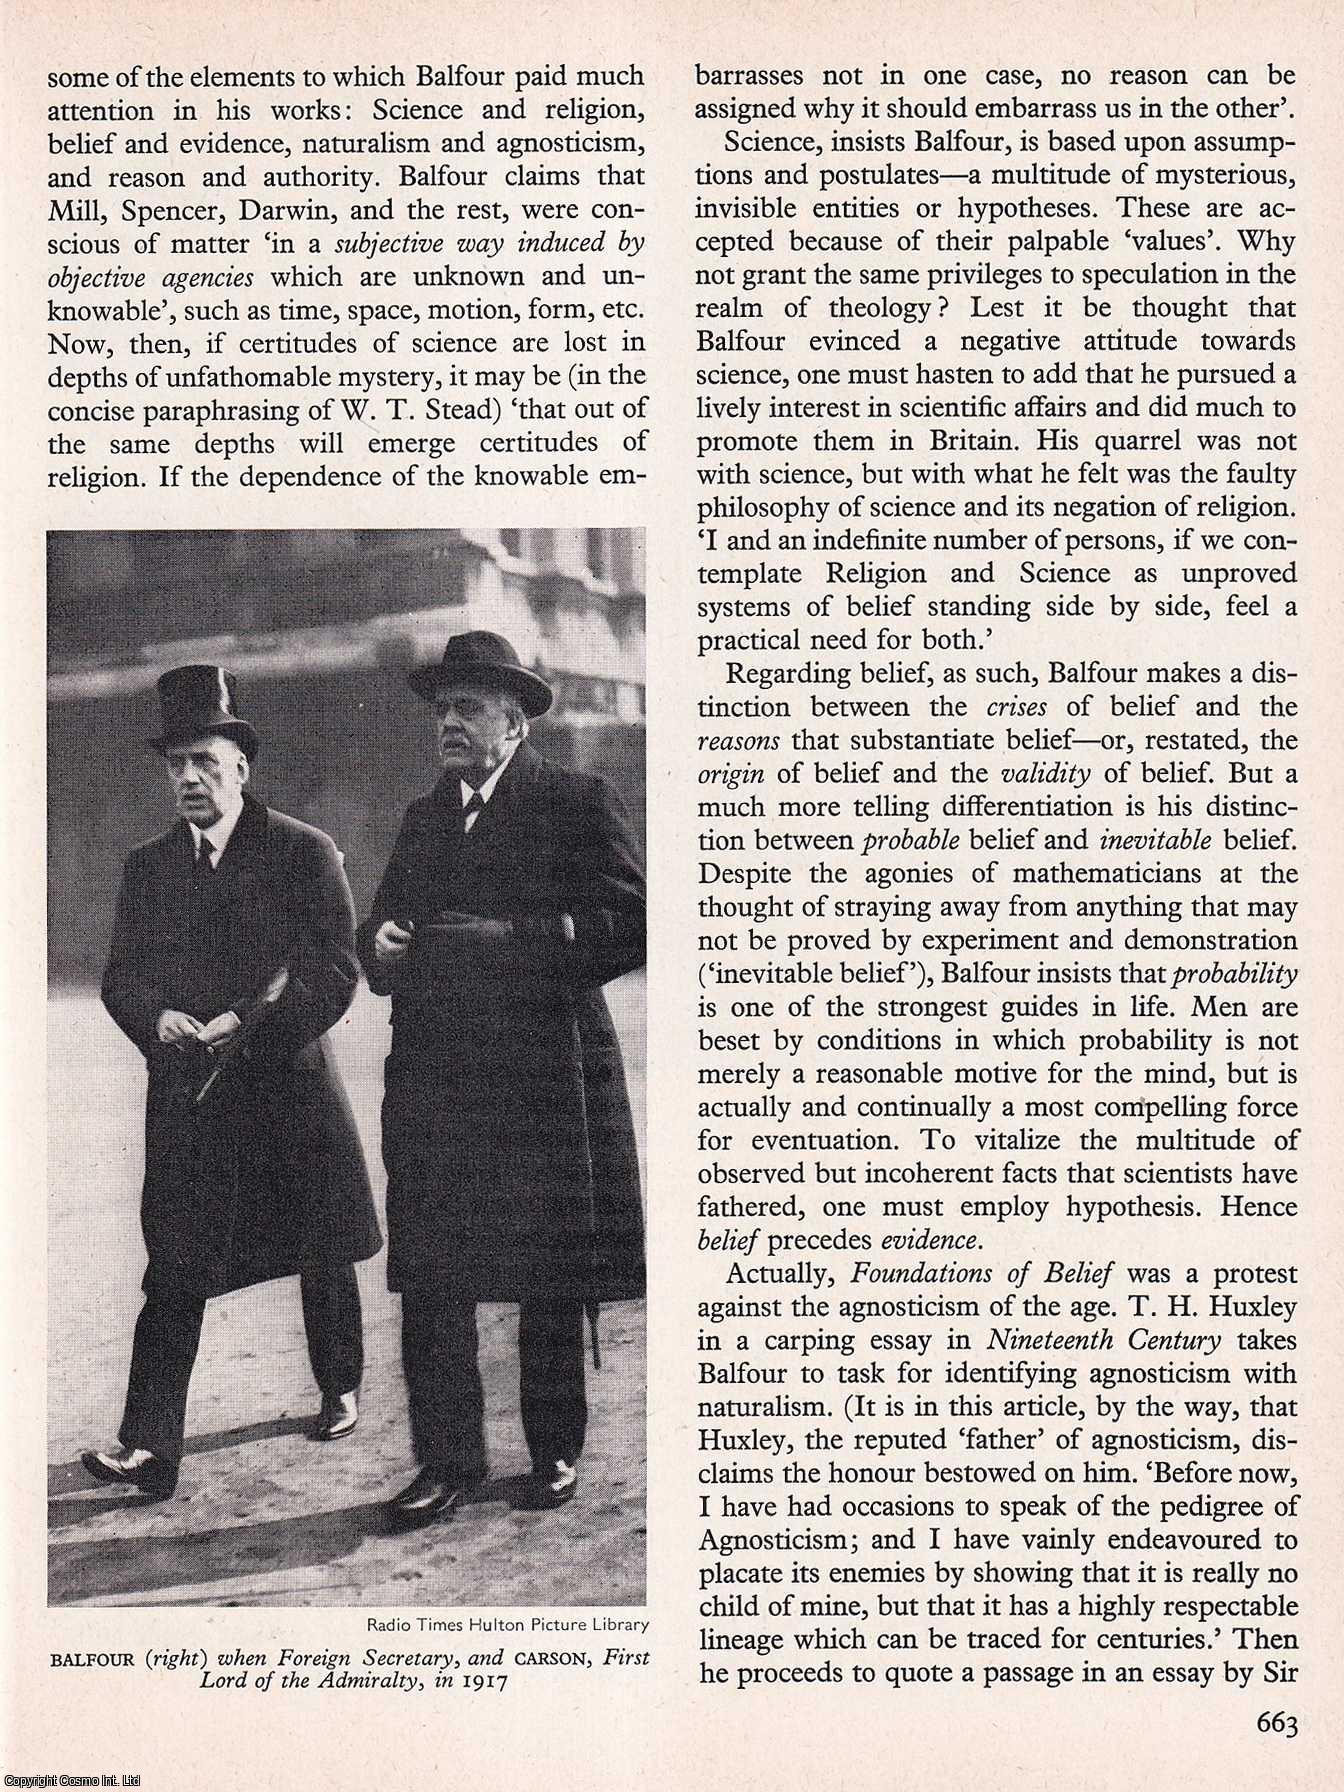 I.T. Naamani - The Theism of Lord Balfour. An original article from History Today magazine, 1967.